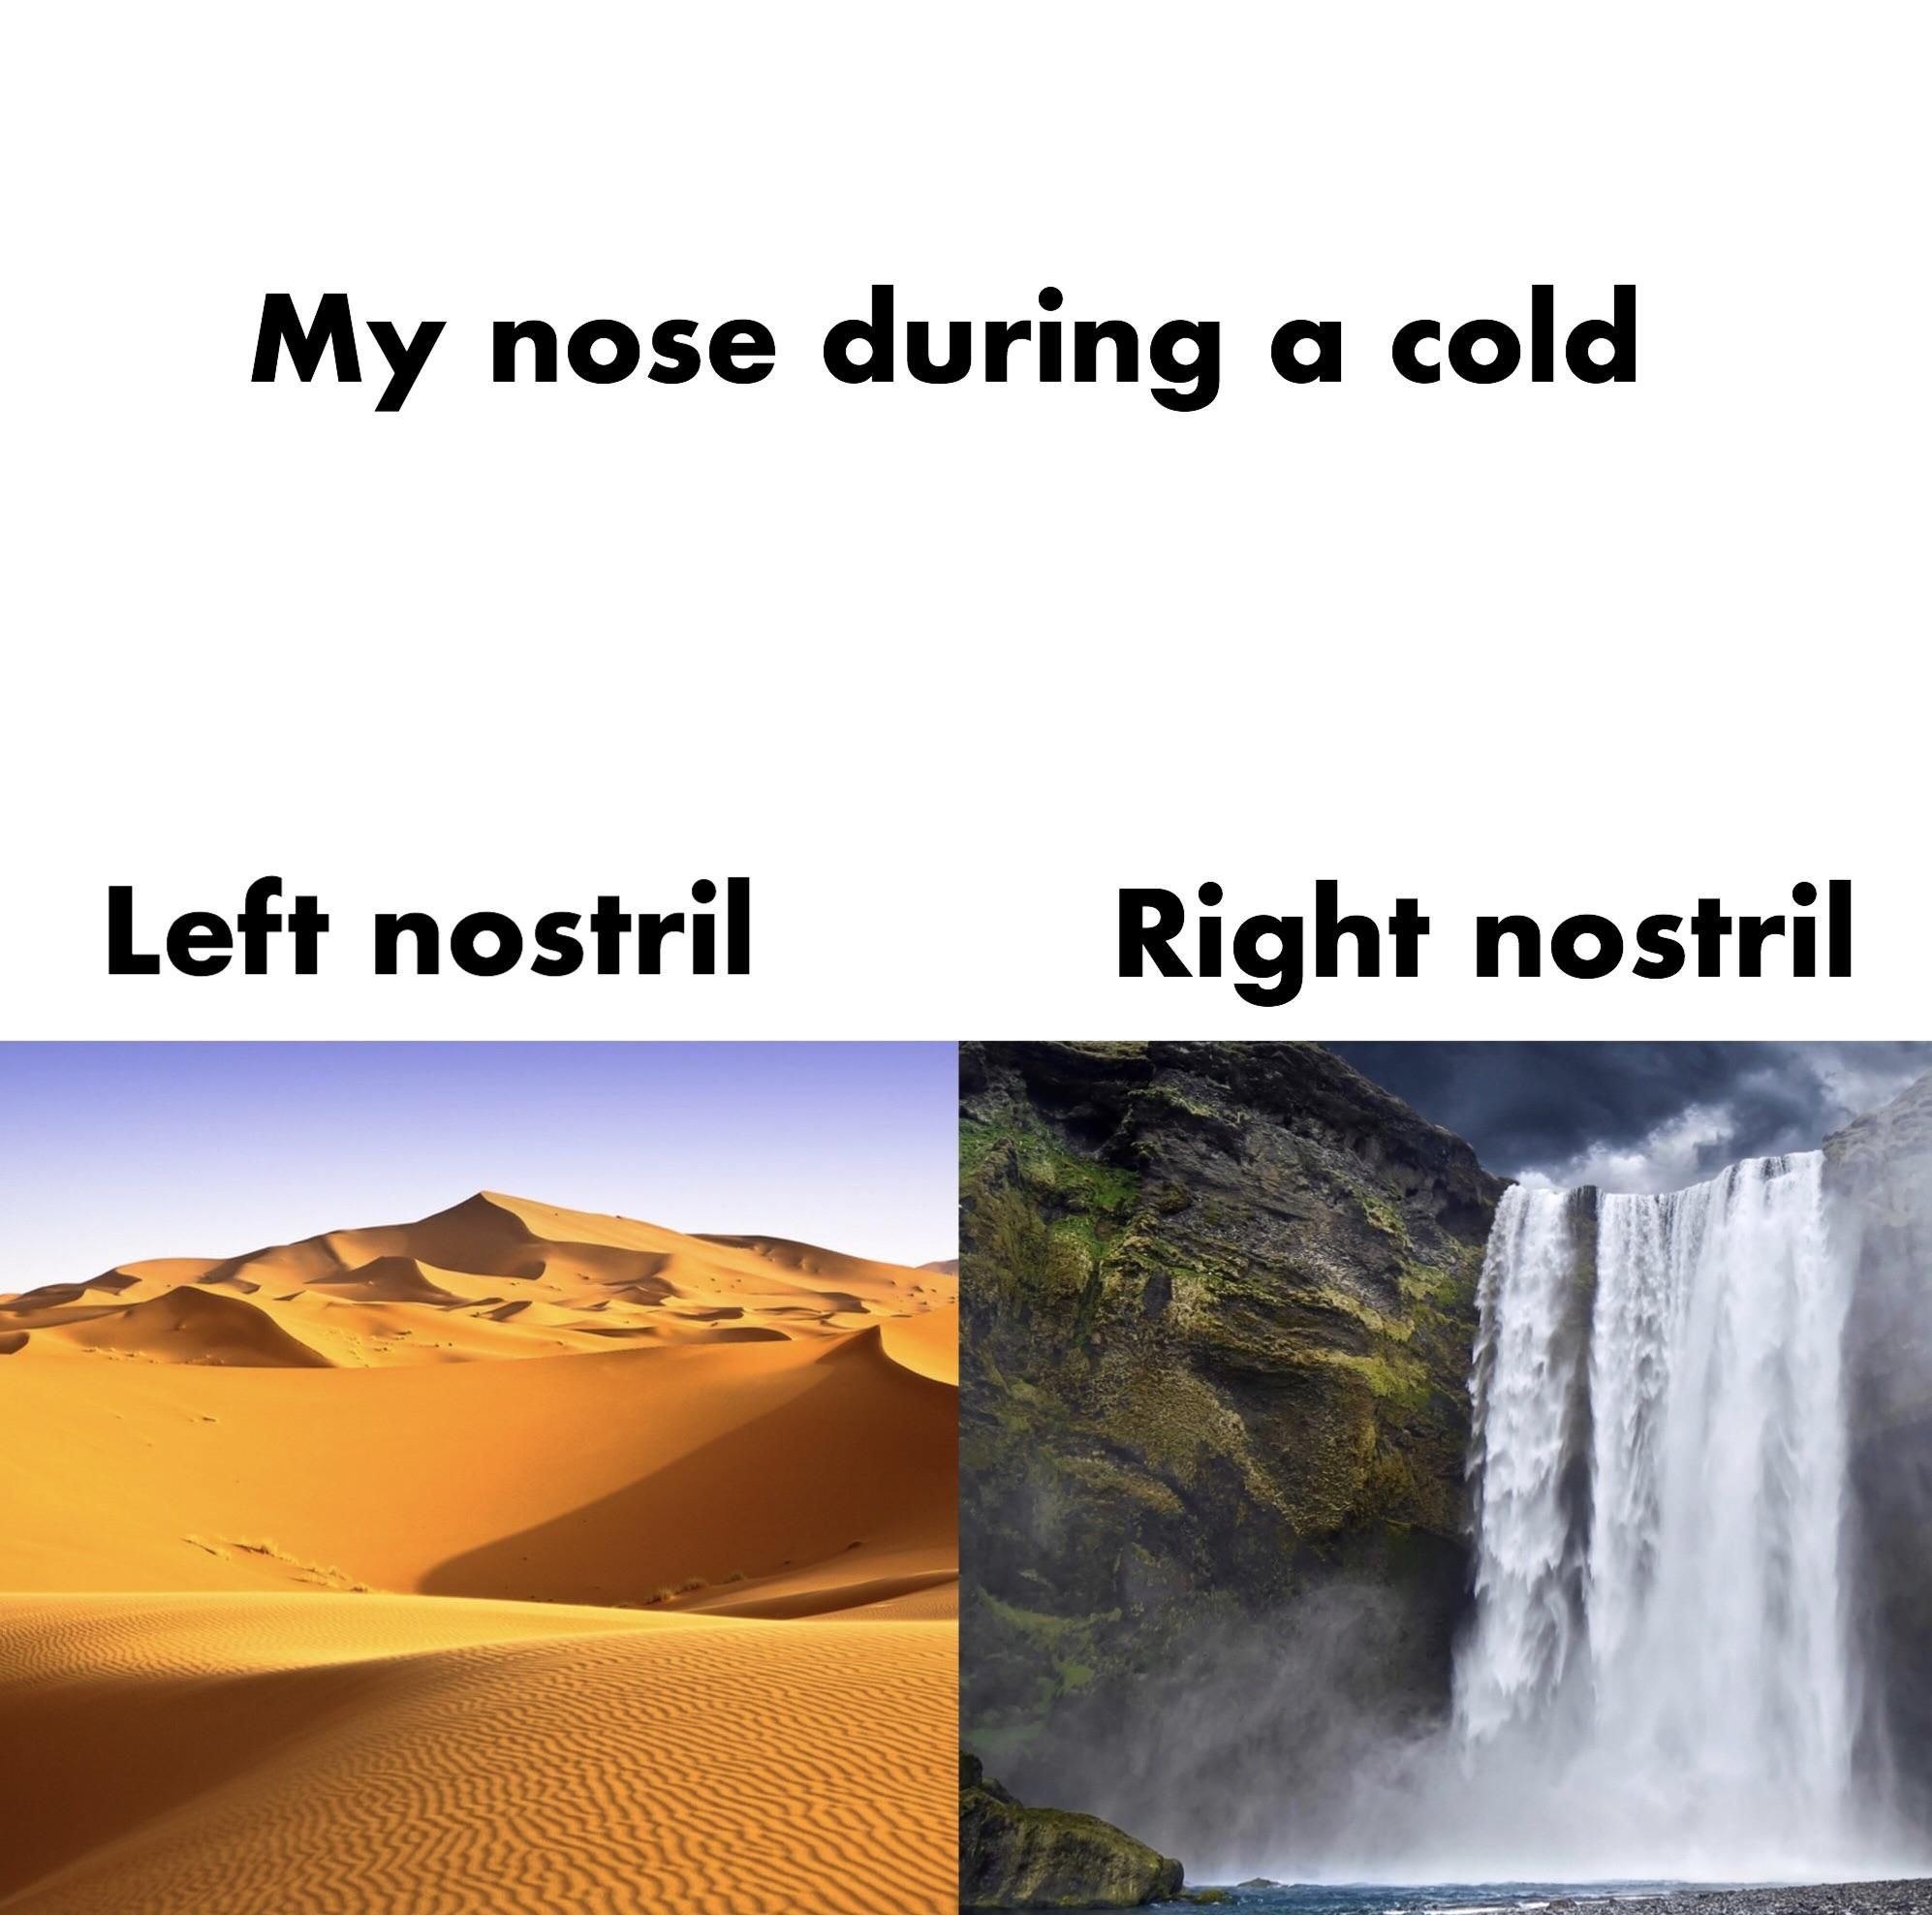 My nose during a cold...